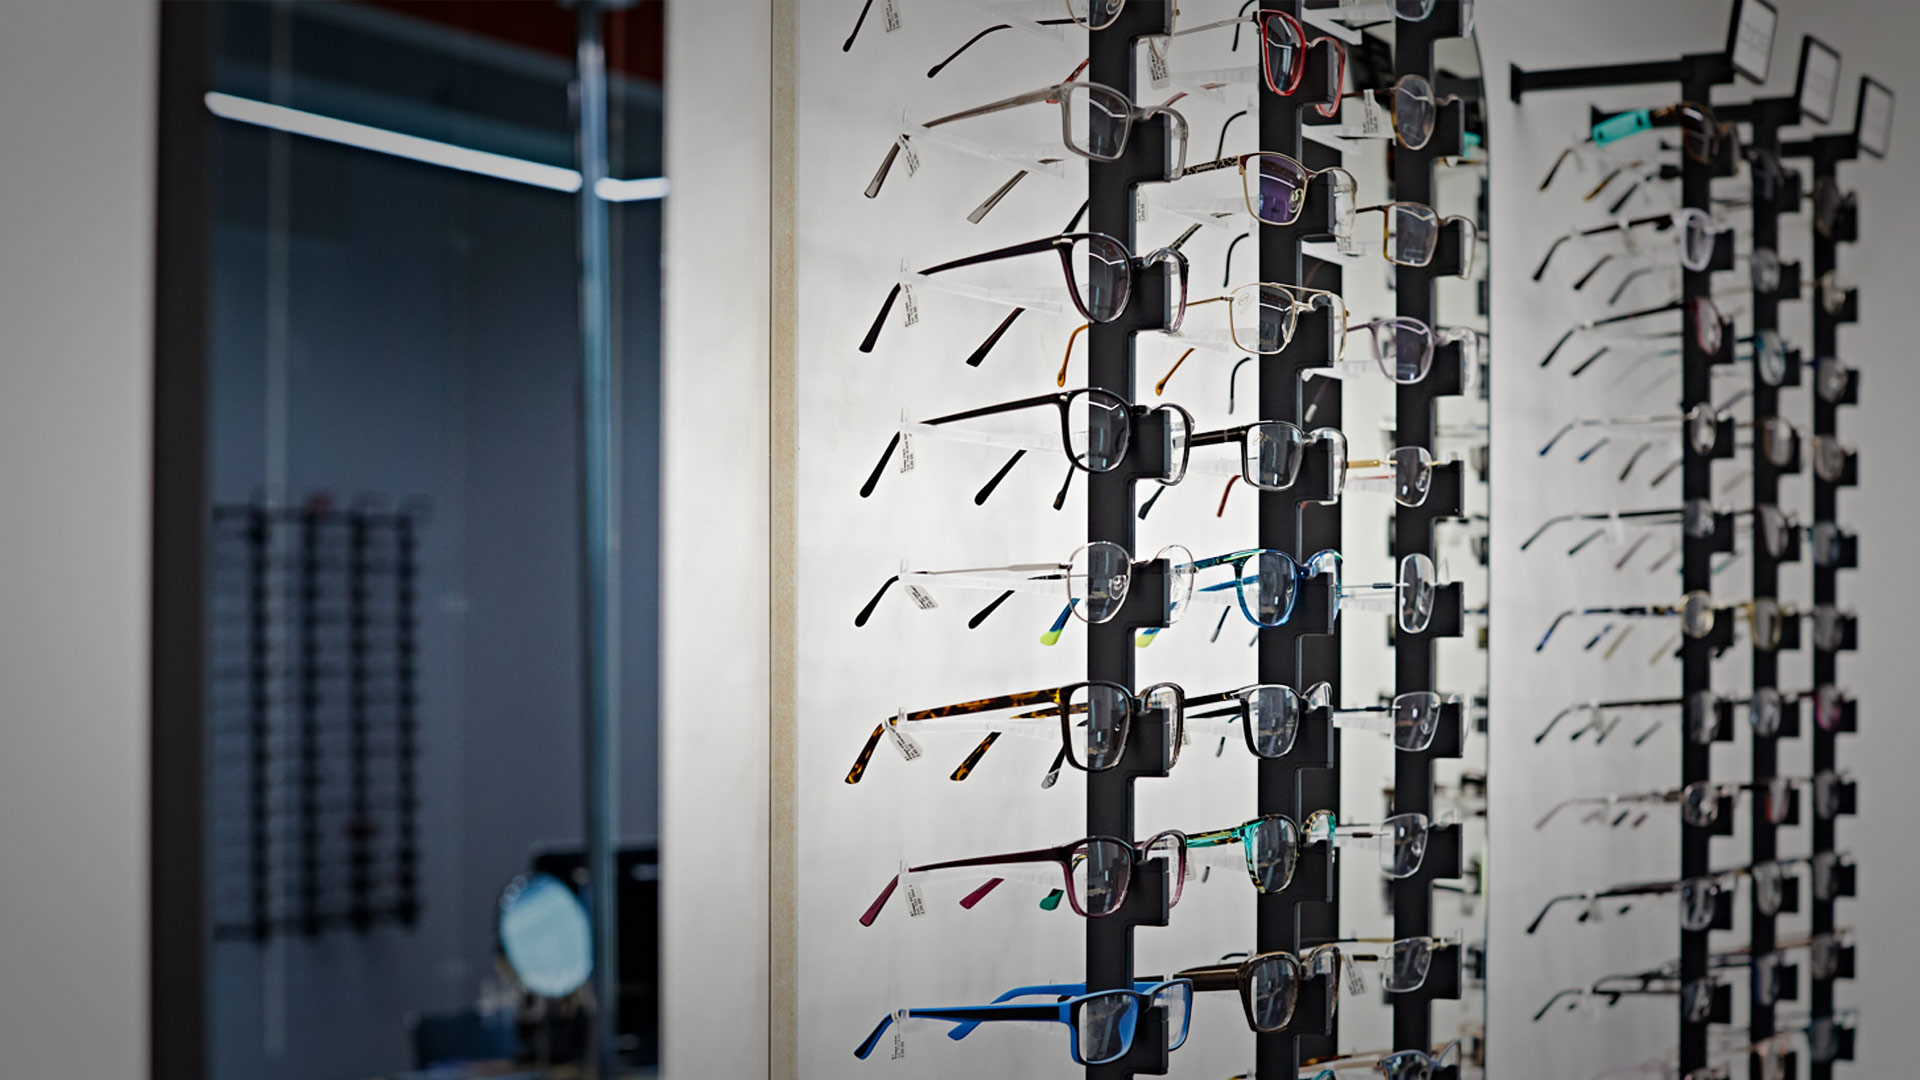 Spectacles on display in the University Valli Opticians